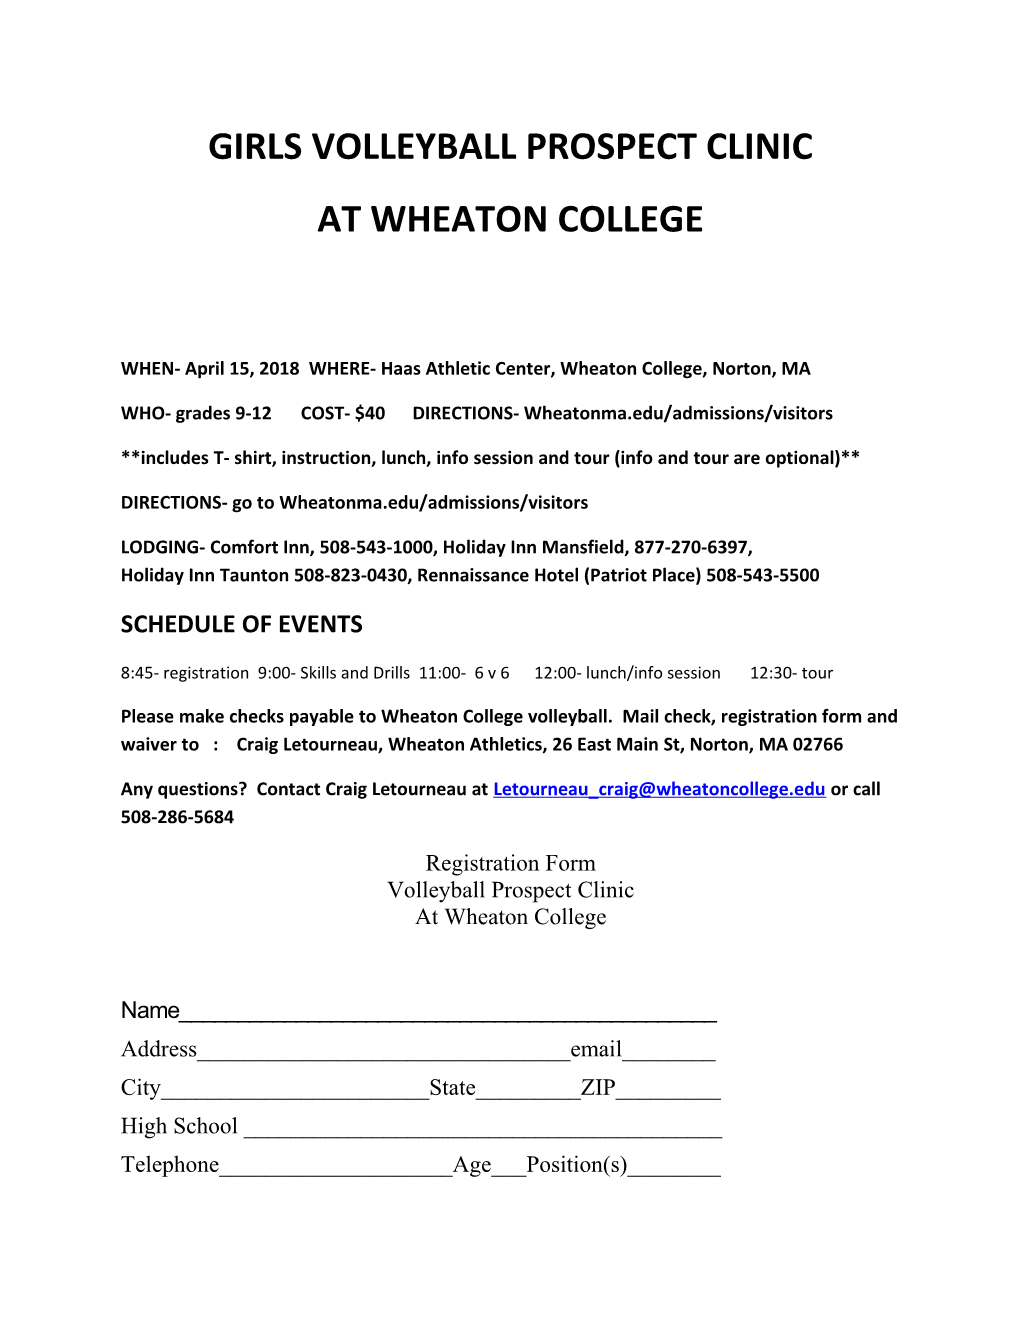 Girls Volleyball Prospect Clinic